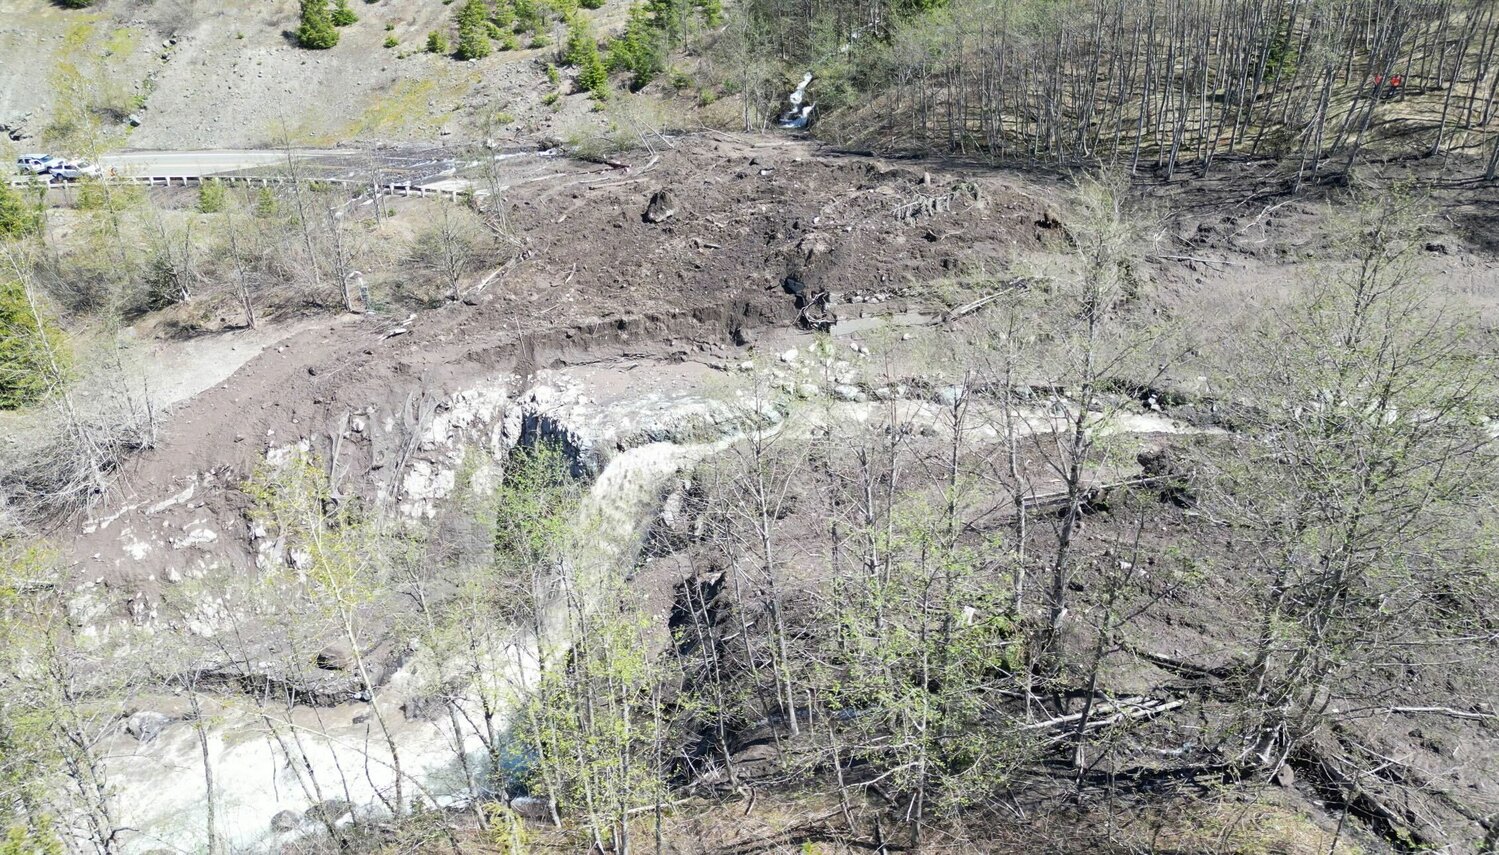 The debris slide on the Spirit Lake Highway about 2 miles from Johnston Ridge is pictured from above on Monday morning.